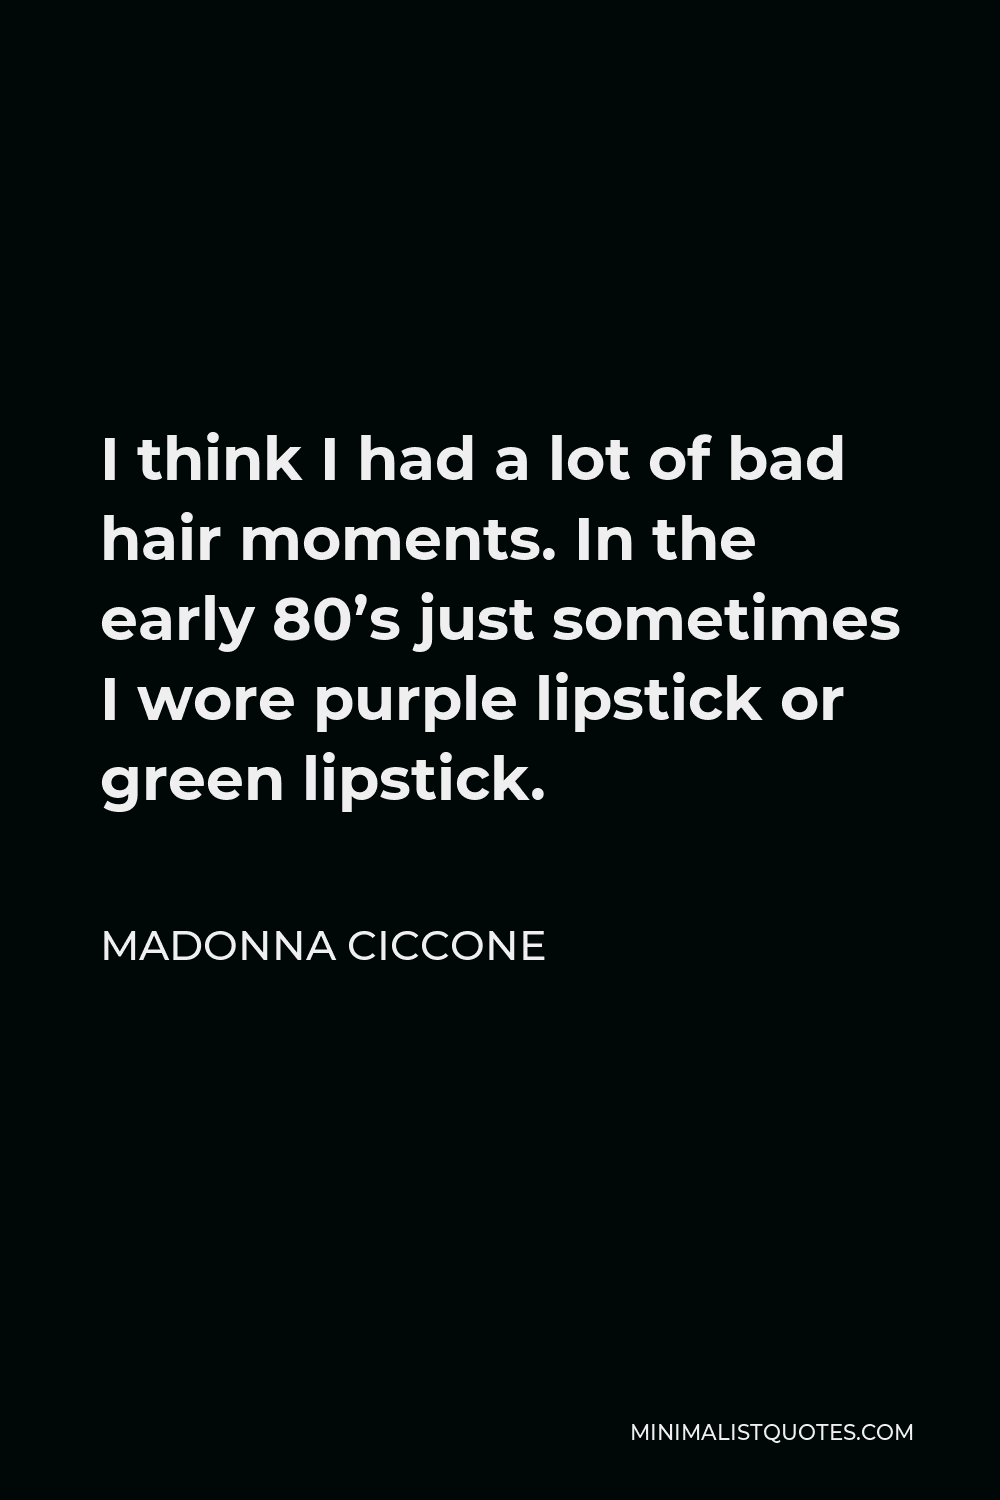 Madonna Ciccone Quote - I think I had a lot of bad hair moments. In the early 80’s just sometimes I wore purple lipstick or green lipstick.